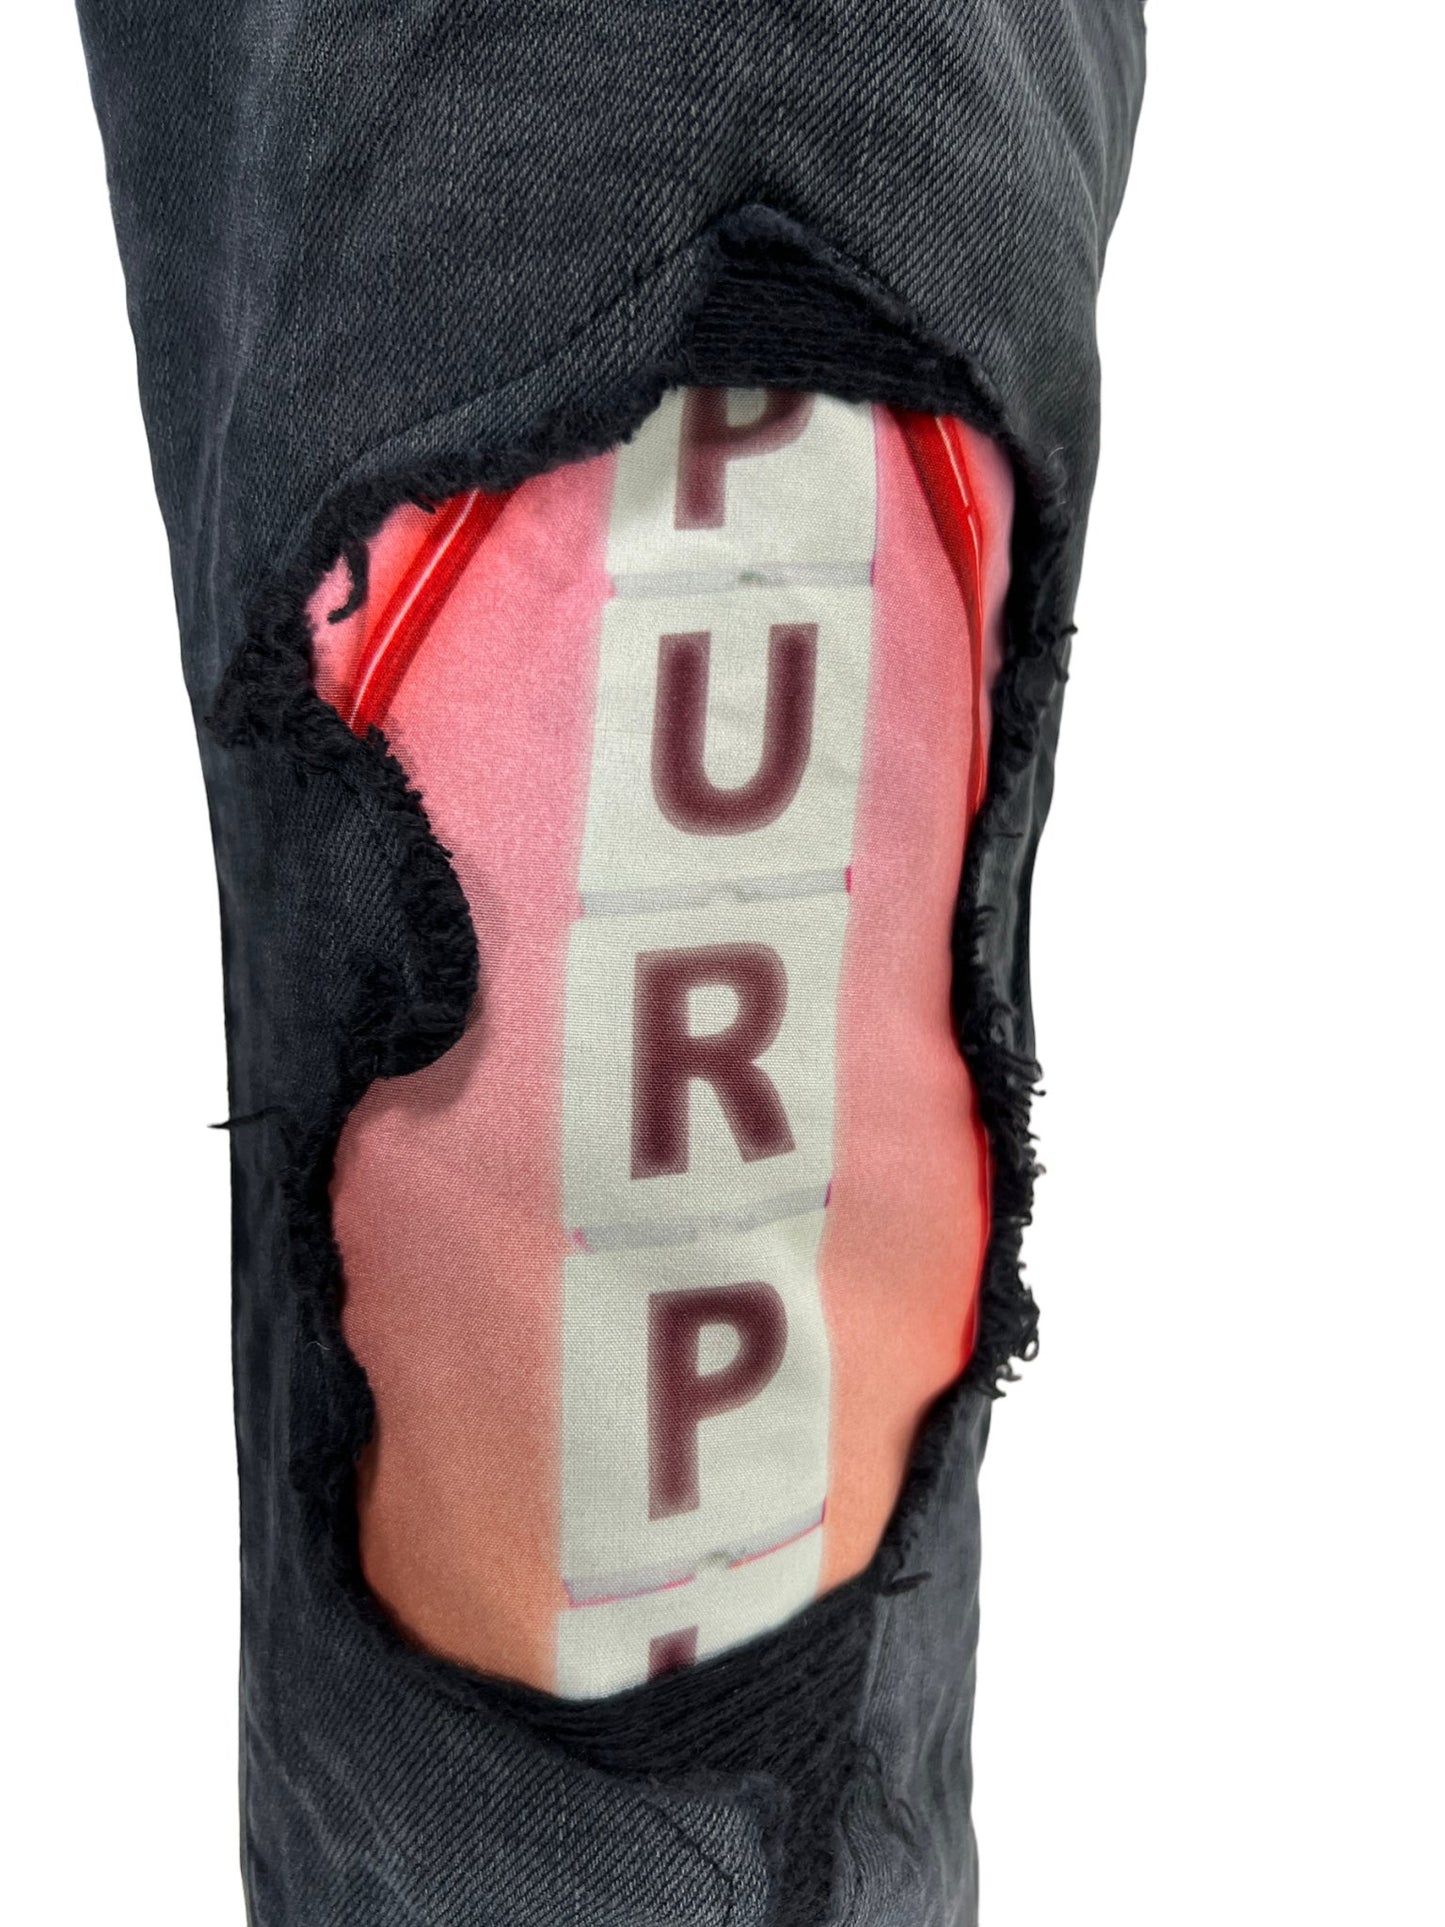 A pair of PURPLE BRAND skinny jeans with the word "purple" on them.